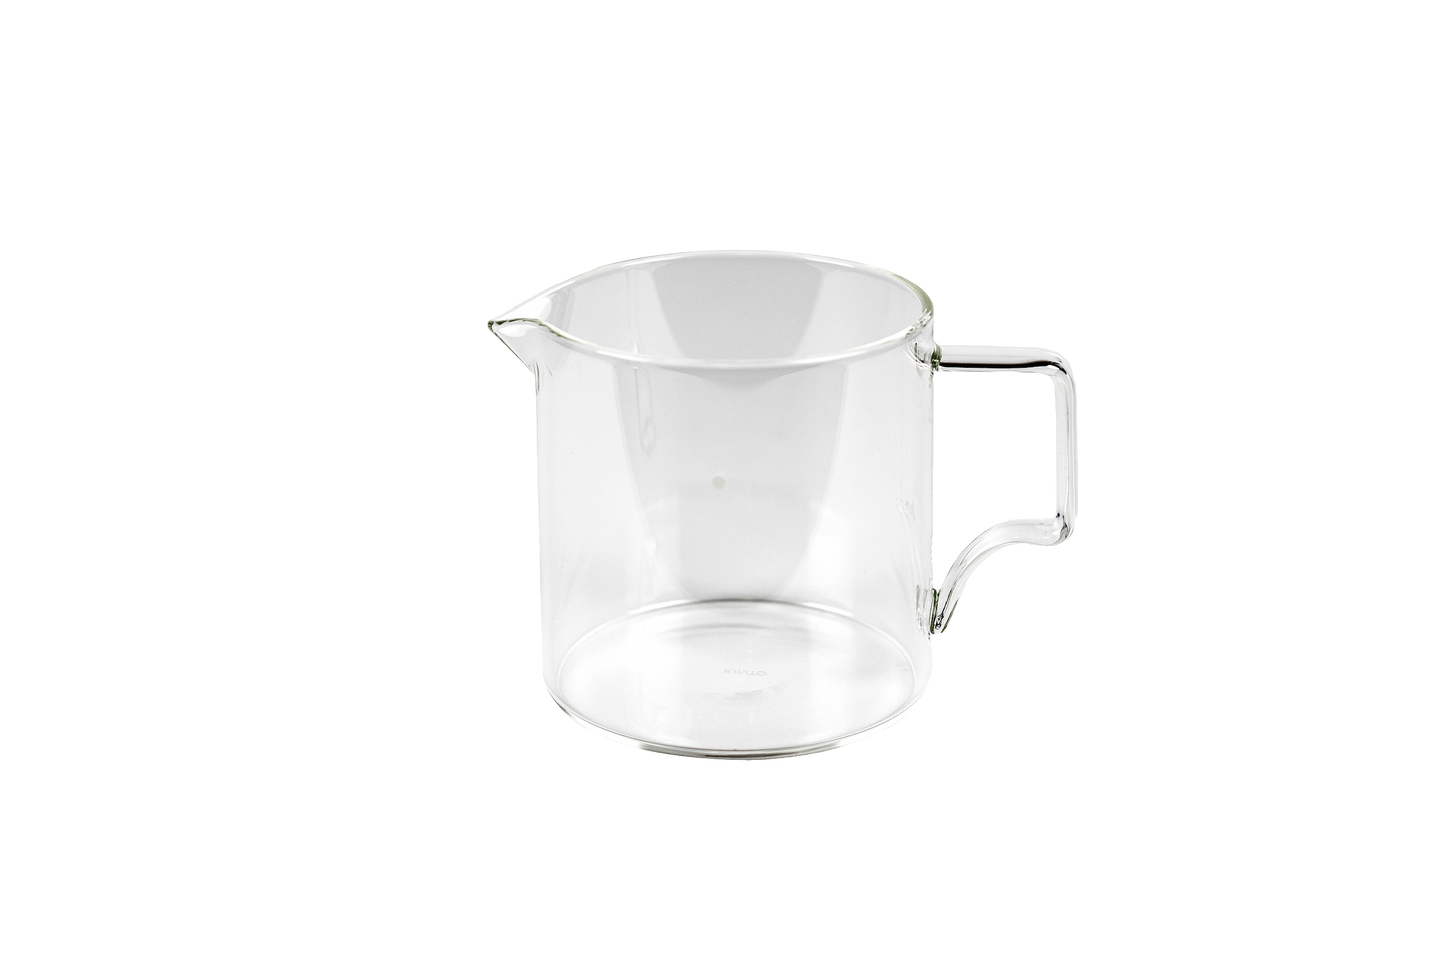 This heat resistant decanter from Kinto Japan holds up to 300ml, allowing you to bring your brew down to temperature in a smaller cup or to share with friends.